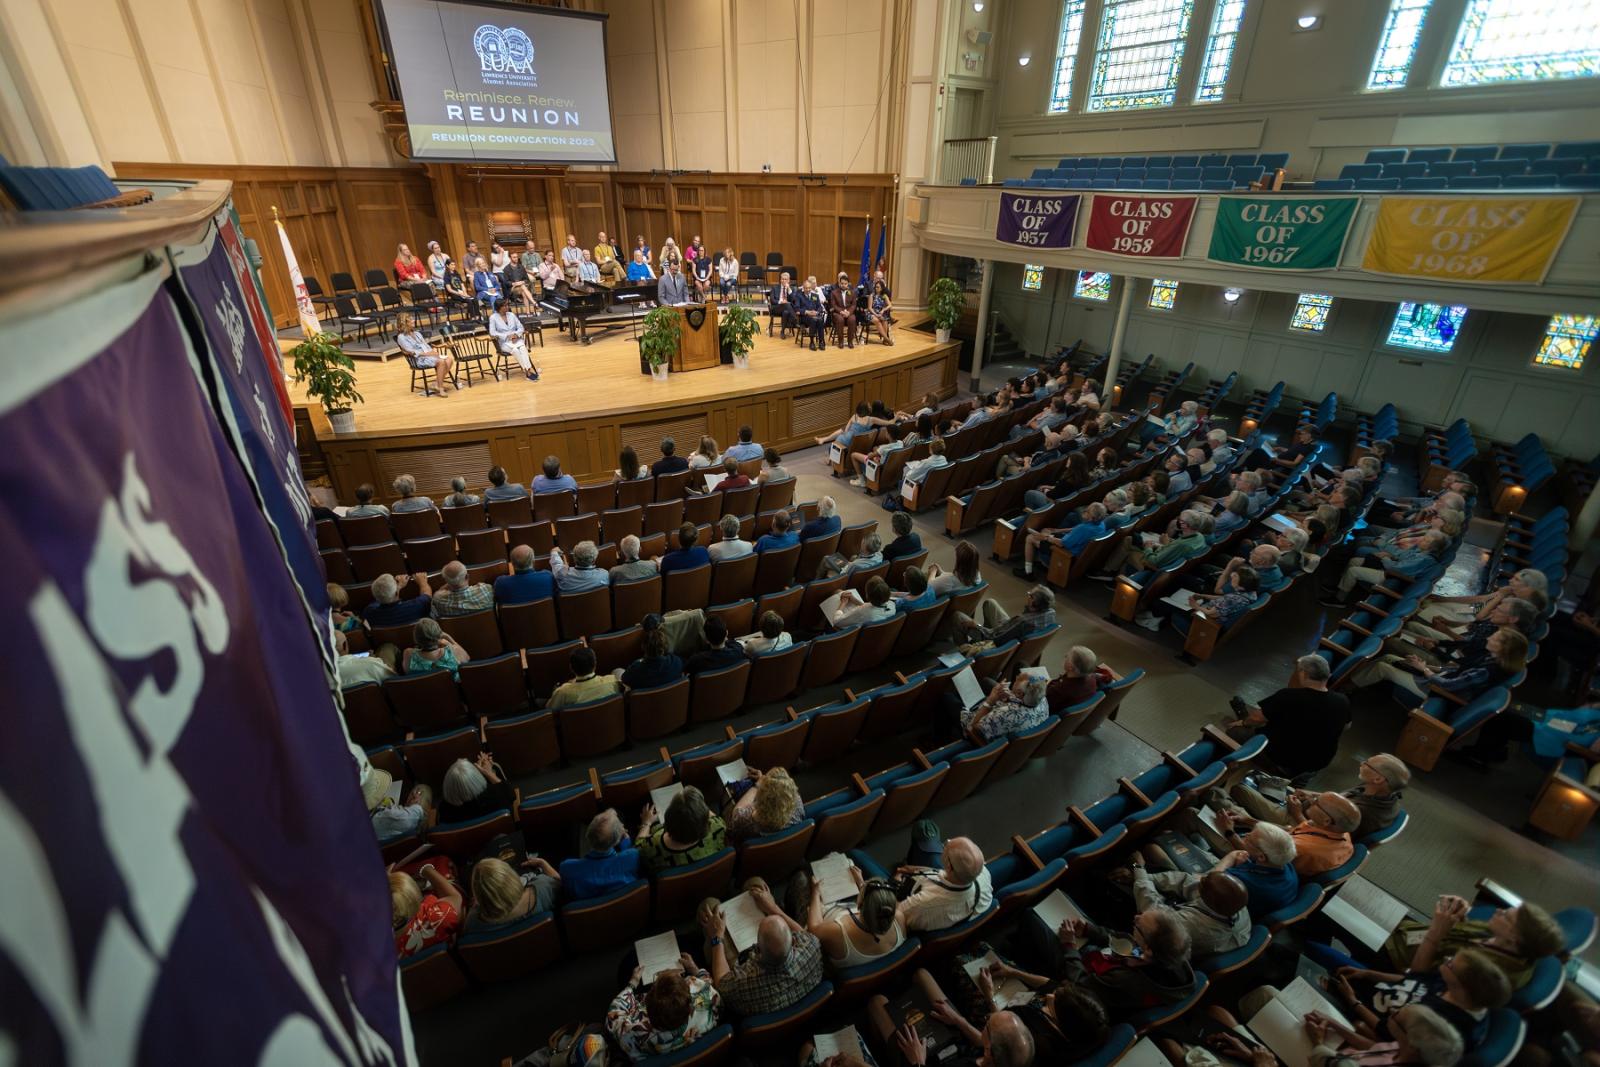 Convocation is held in Memorial Chapel during Reunion 2023.